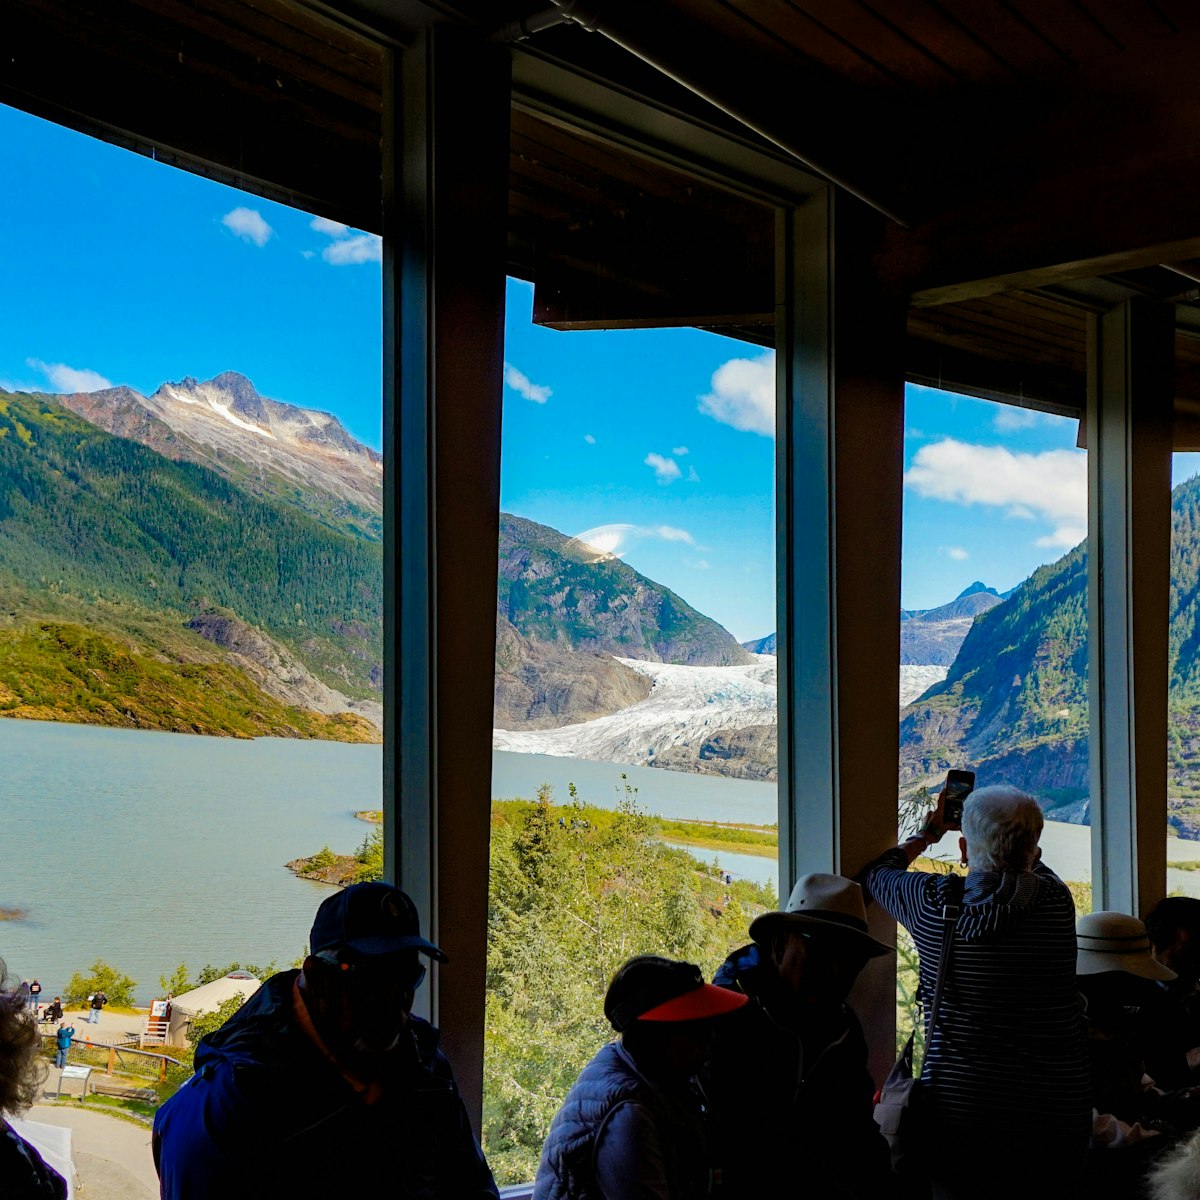 View of the glacier from the inside of the Mendenhall Glacier Visitor Center.